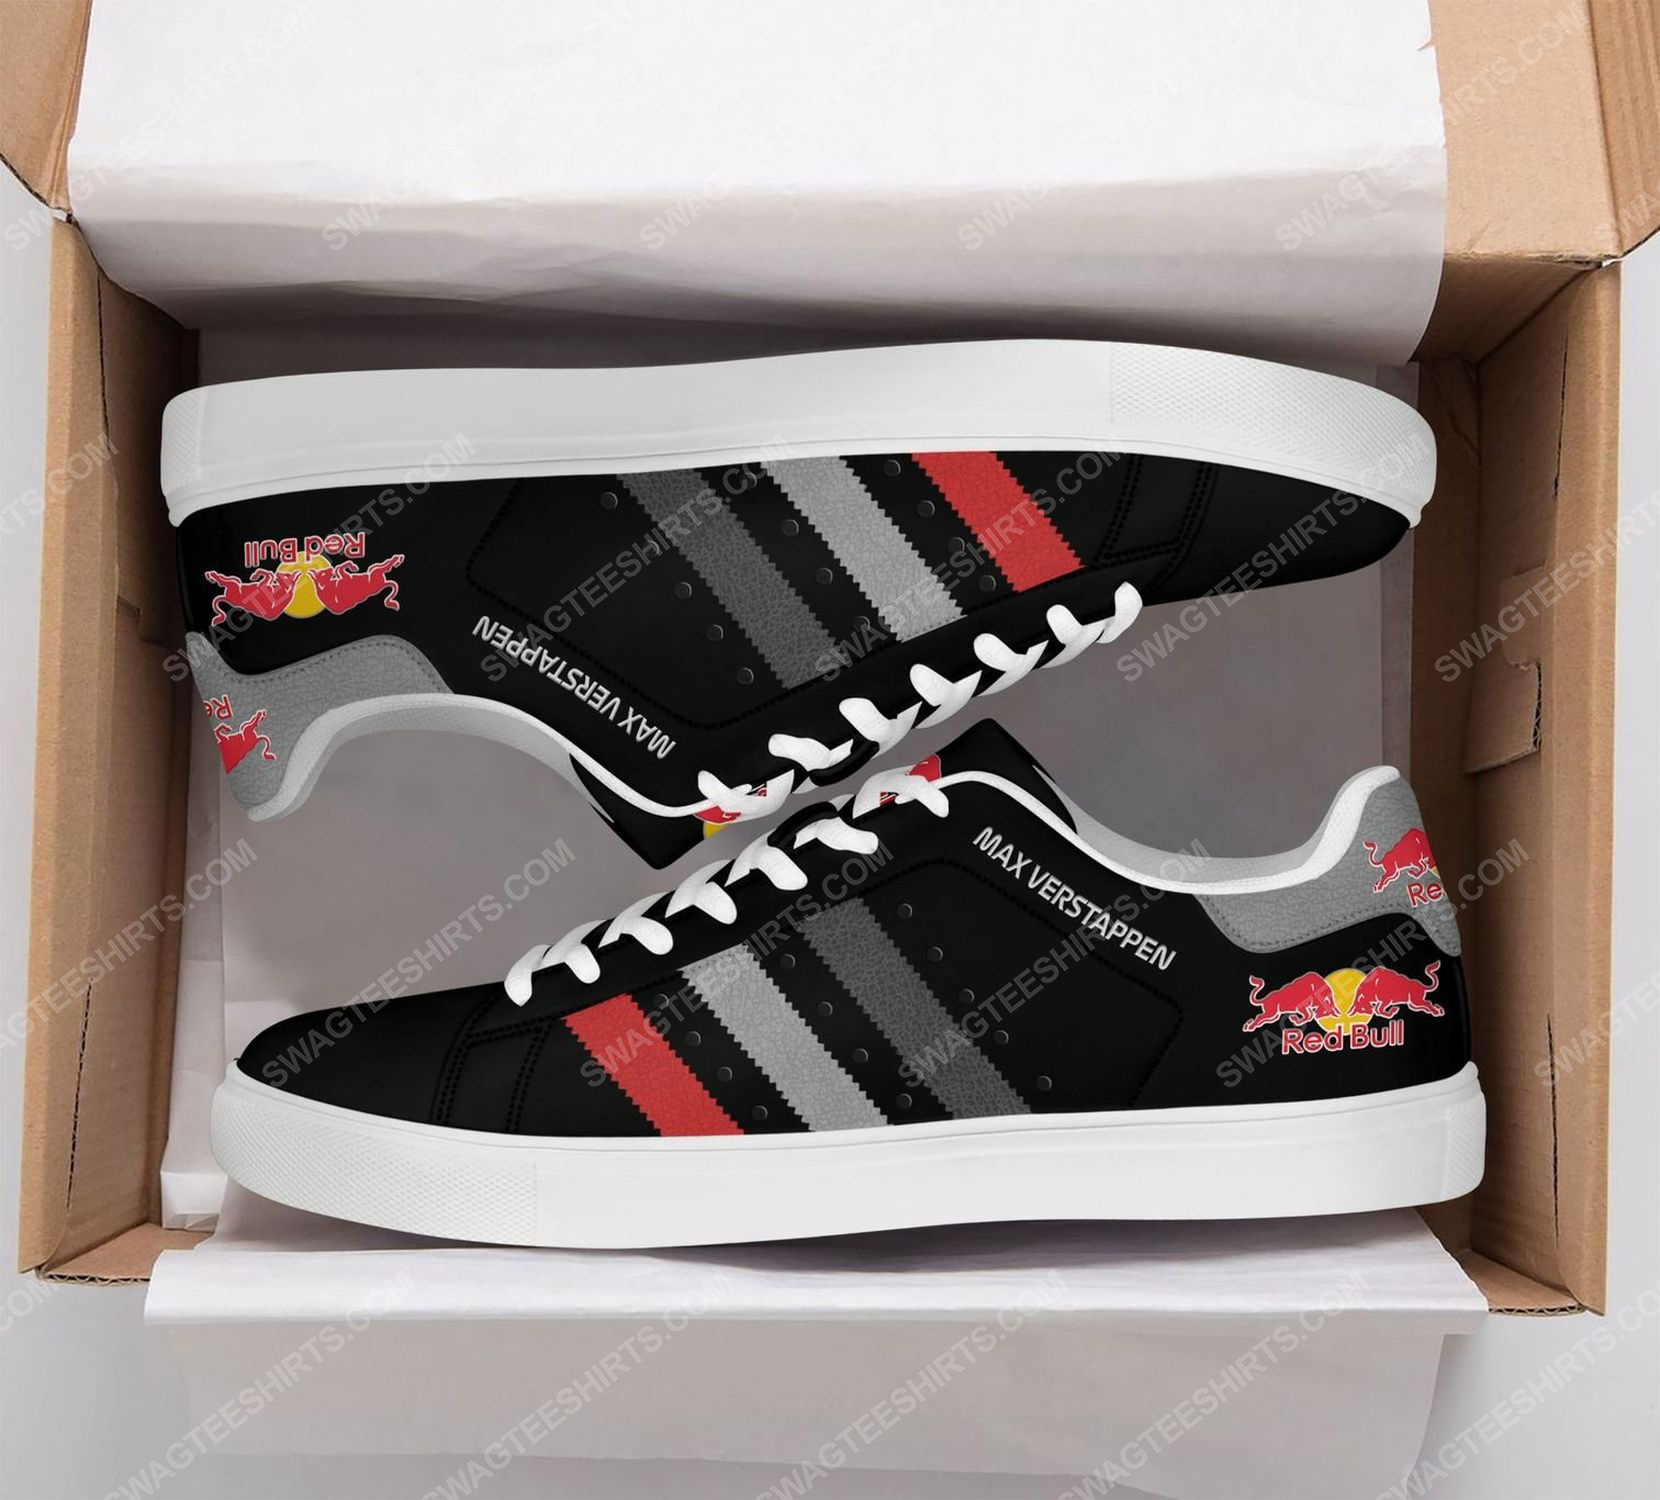 Max verstappen red bull stan smith shoes 2